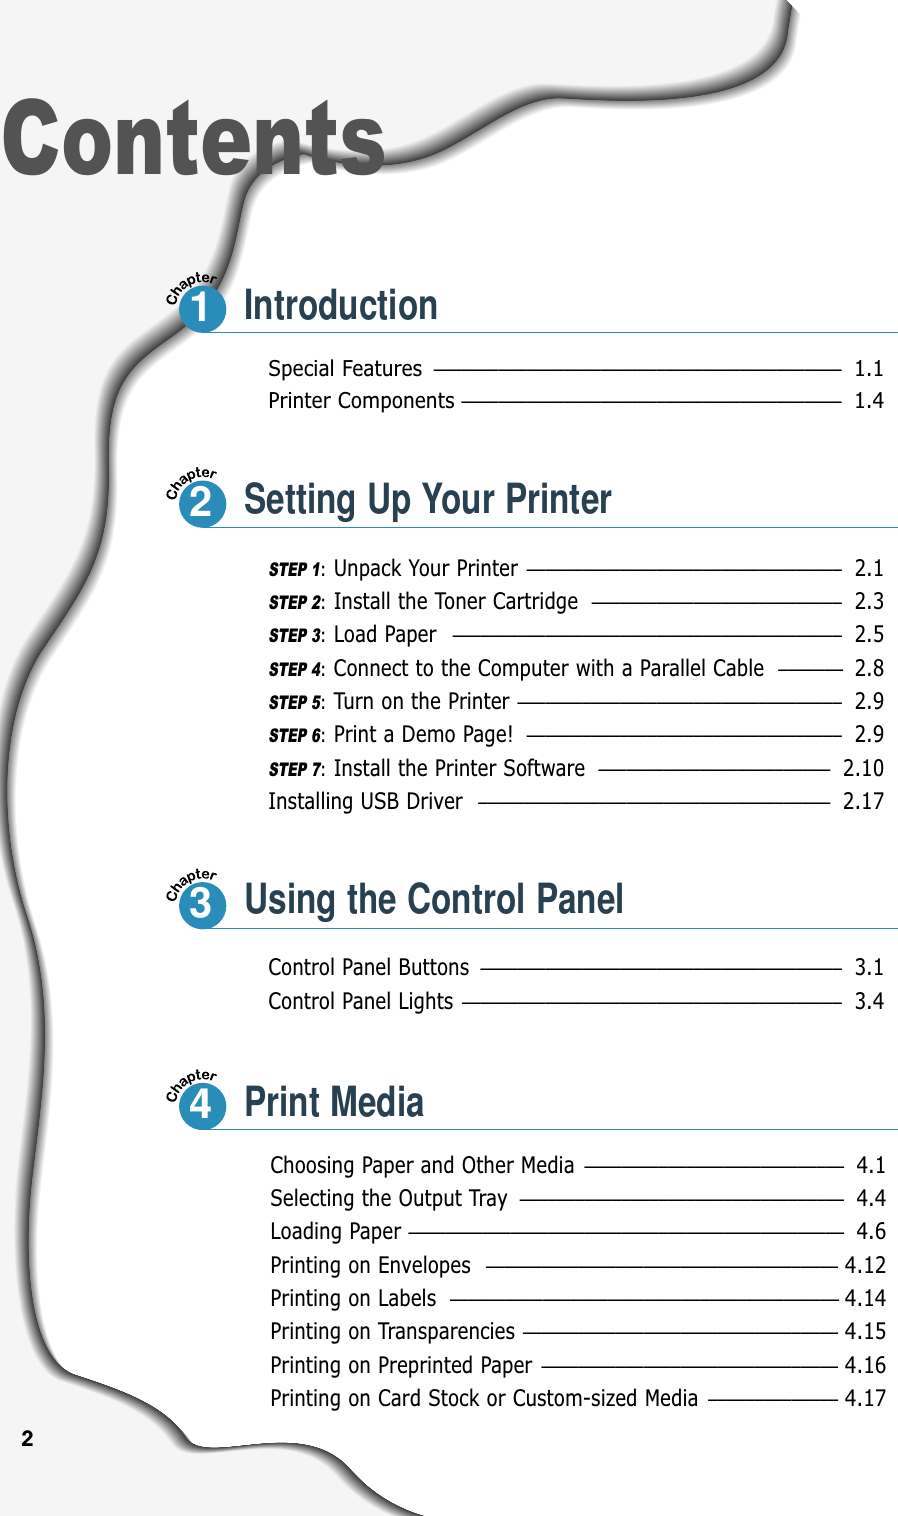 Special Features ––––––––––––––––––––––––––––––––––––––––––––1.1Printer Components–––––––––––––––––––––––––––––––––––––––––1.4Control Panel Buttons ––––––––––––––––––––––––––––––––––––––– 3.1Control Panel Lights ––––––––––––––––––––––––––––––––––––––––– 3.4ContentsSTEP 1:Unpack Your Printer –––––––––––––––––––––––––––––––––– 2.1STEP 2:Install the Toner Cartridge ––––––––––––––––––––––––––– 2.3STEP 3:Load Paper –––––––––––––––––––––––––––––––––––––––––– 2.5STEP 4:Connect to the Computer with a Parallel Cable  ––––––– 2.8STEP 5:Turn on the Printer ––––––––––––––––––––––––––––––––––– 2.9STEP 6:Print a Demo Page! –––––––––––––––––––––––––––––––––– 2.9STEP 7:Install the Printer Software ––––––––––––––––––––––––– 2.10Installing USB Driver –––––––––––––––––––––––––––––––––––––– 2.17Choosing Paper and Other Media –––––––––––––––––––––––––––– 4.1Selecting the Output Tray ––––––––––––––––––––––––––––––––––– 4.4Loading Paper ––––––––––––––––––––––––––––––––––––––––––––––– 4.6Printing on Envelopes –––––––––––––––––––––––––––––––––––––– 4.12Printing on Labels –––––––––––––––––––––––––––––––––––––––––– 4.14Printing on Transparencies –––––––––––––––––––––––––––––––––– 4.15Printing on Preprinted Paper –––––––––––––––––––––––––––––––– 4.16Printing on Card Stock or Custom-sized Media –––––––––––––– 4.1712Setting Up Your Printer3Using the Control Panel4Print Media2Introduction